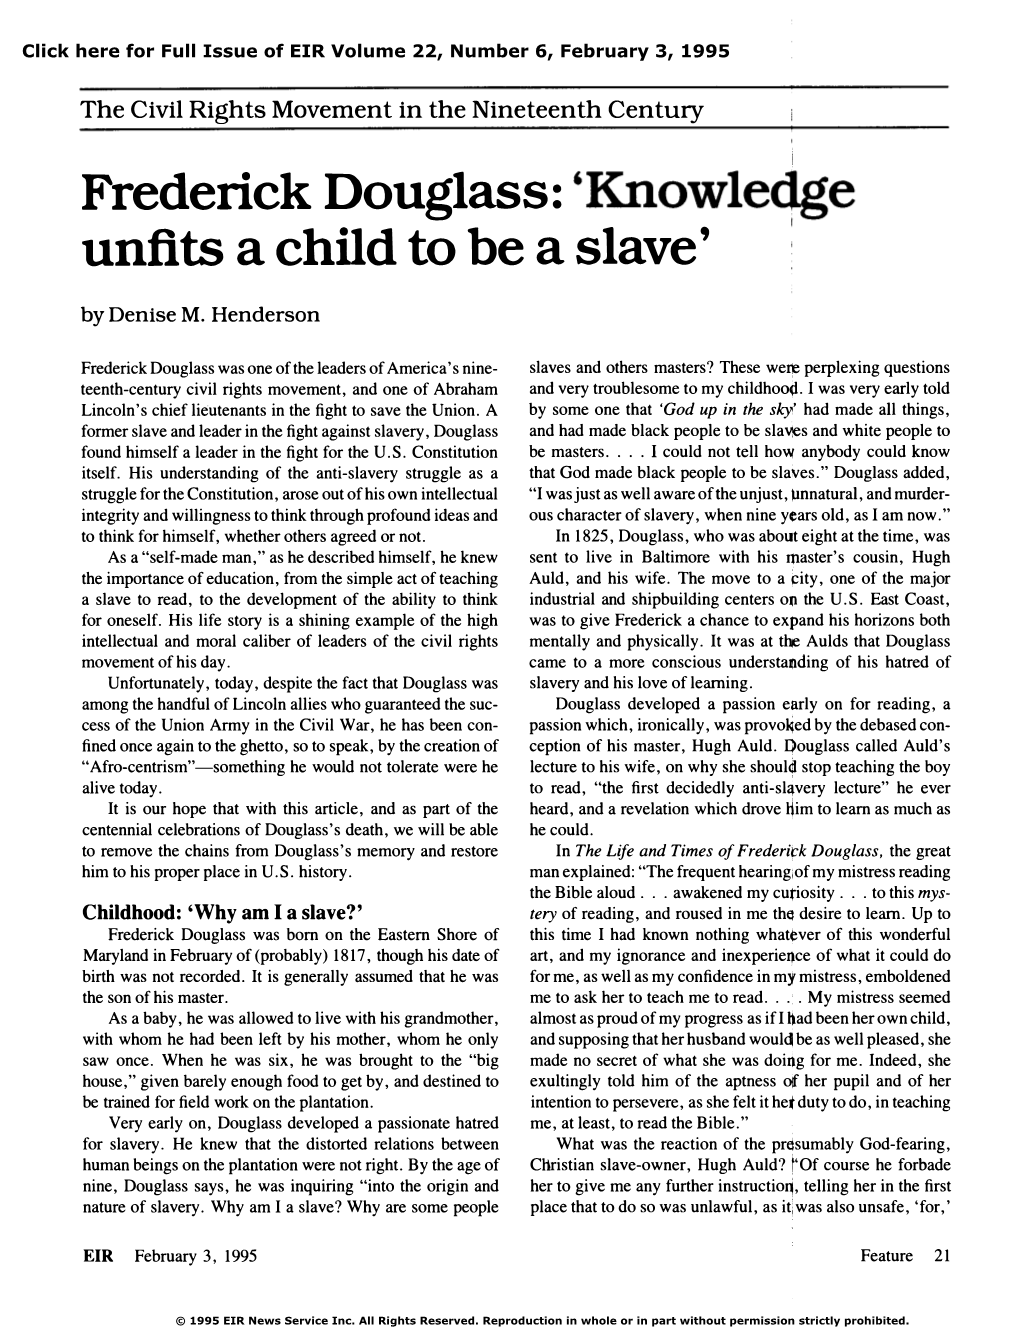 Frederick Douglass: 'Knowledge Unfits a Child to Be a Slave'